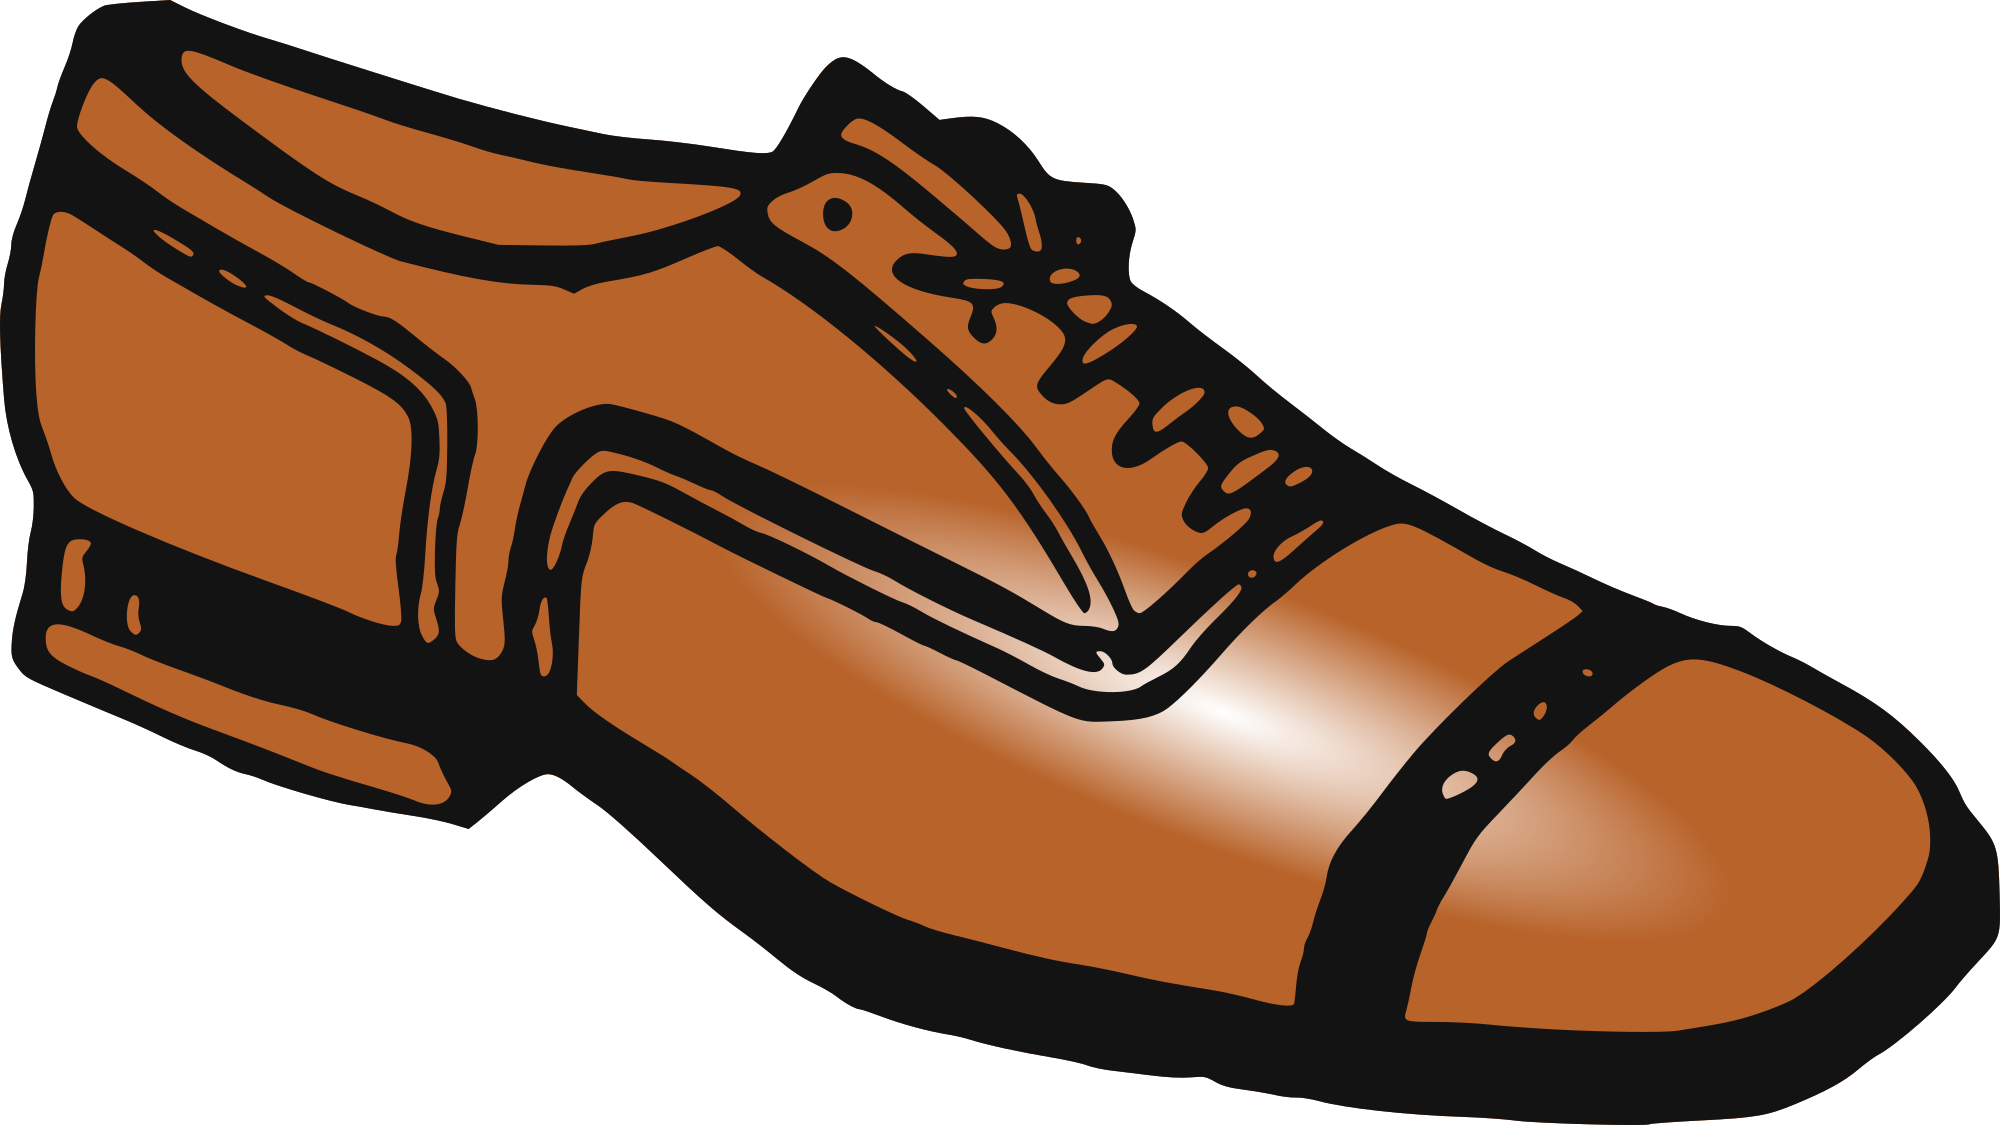 Free stylish mens shoe clipart clipart and vector image